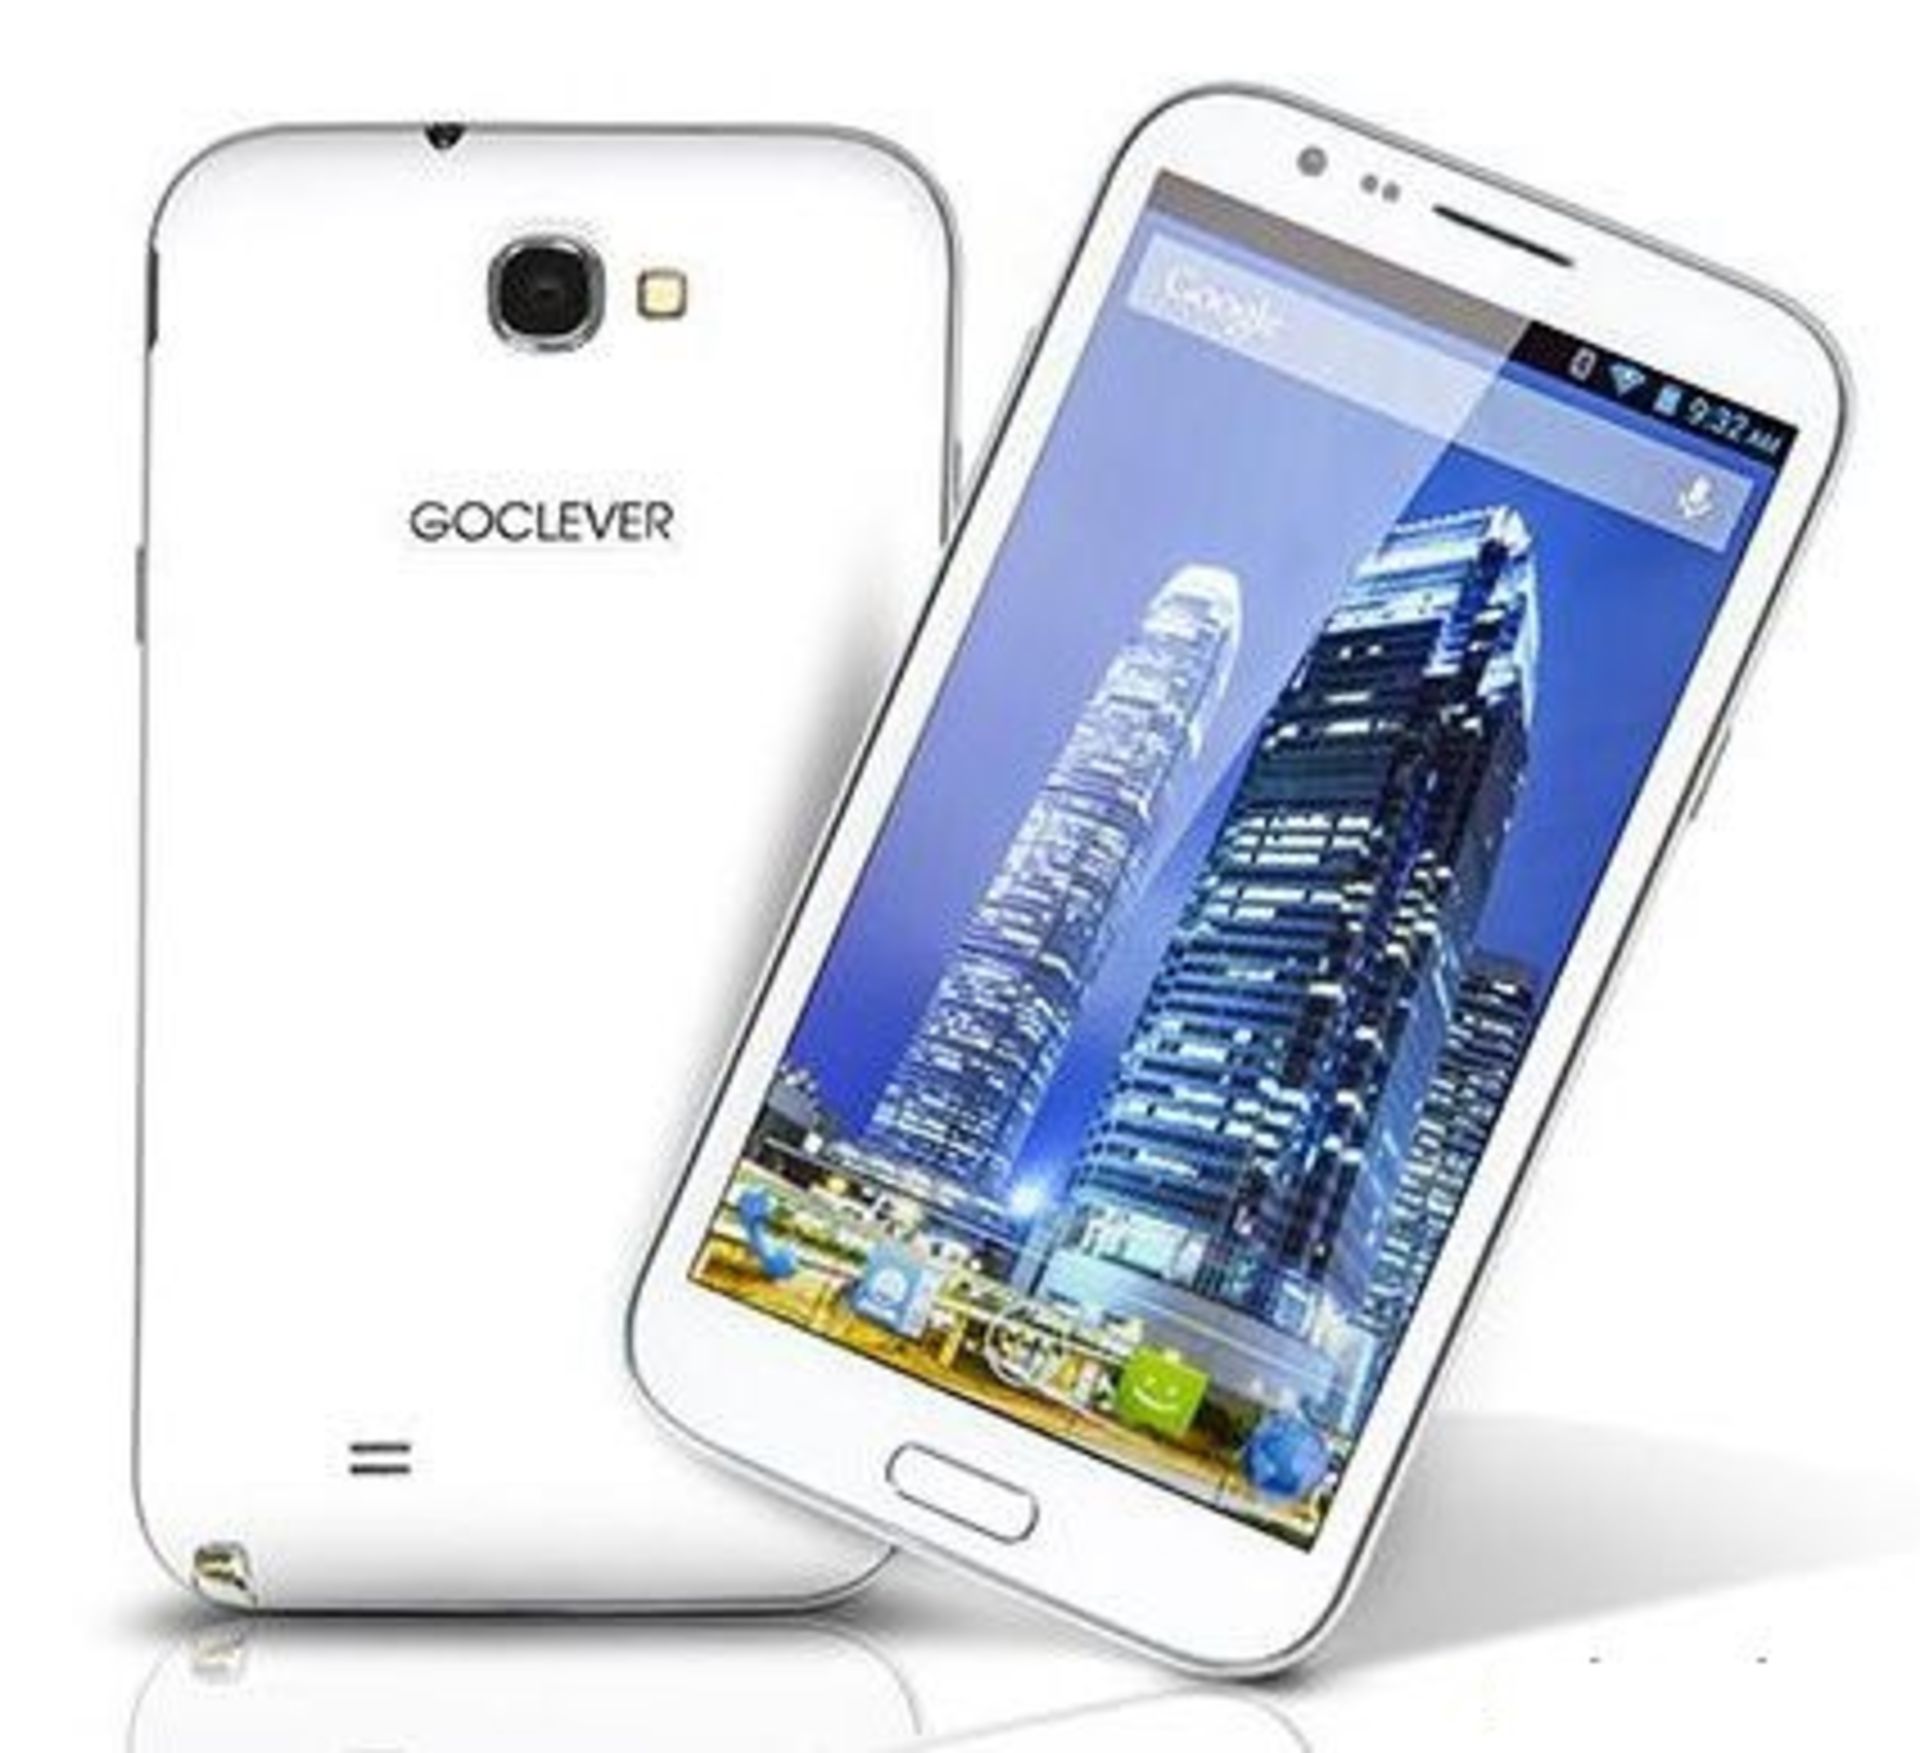 V GRADE A GOCLEVER FONE 570Q - 5.7" HD IPS - ANDROID 4.2 - QUAD CORE - NEARLY NEW